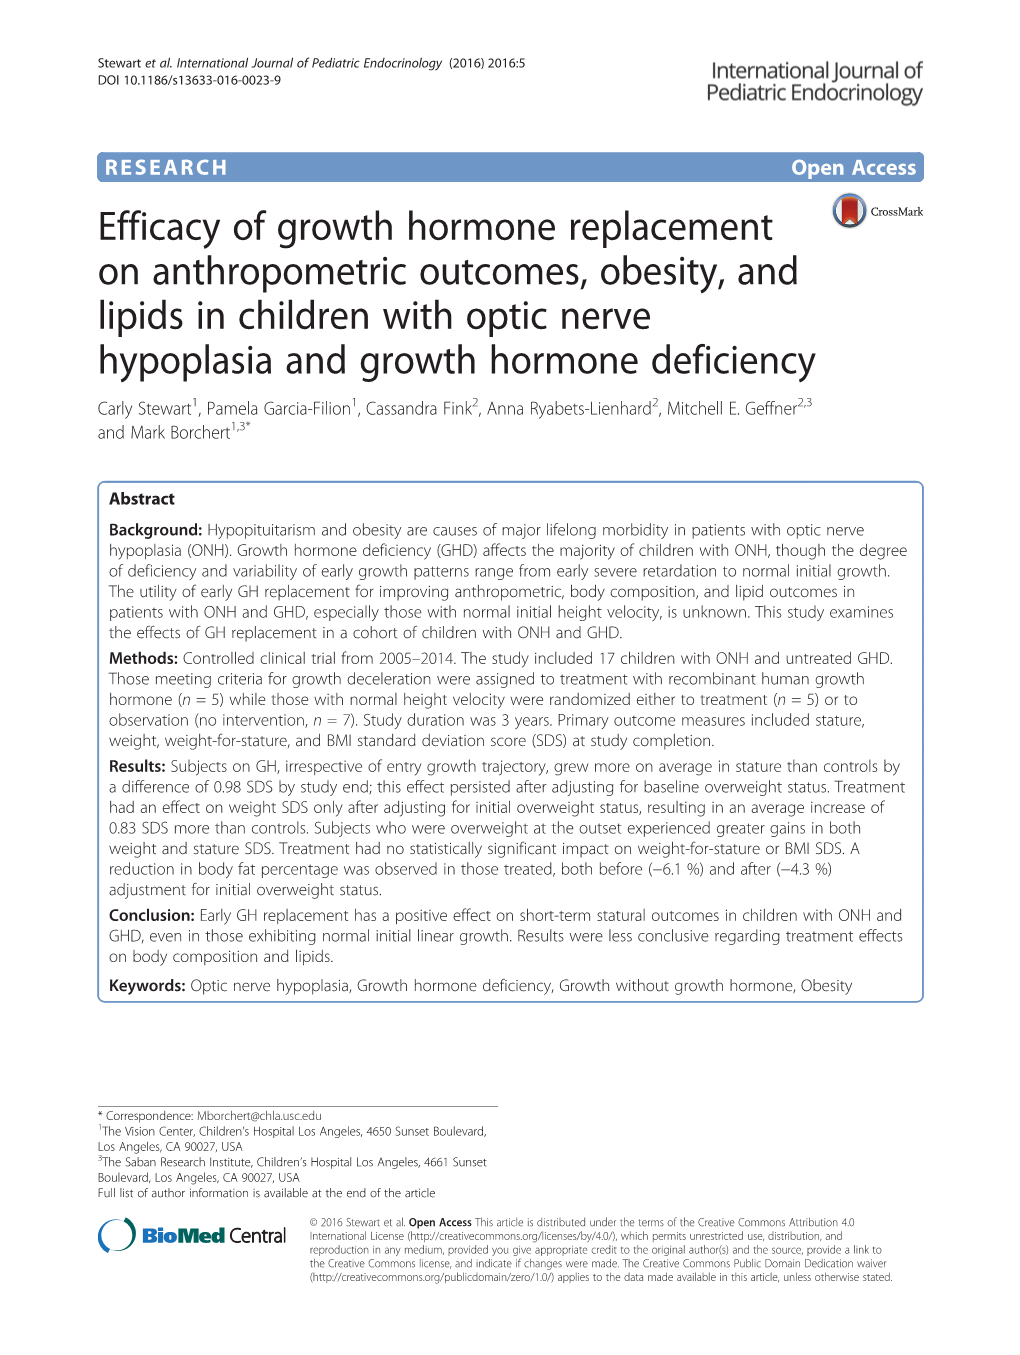 Efficacy of Growth Hormone Replacement on Anthropometric